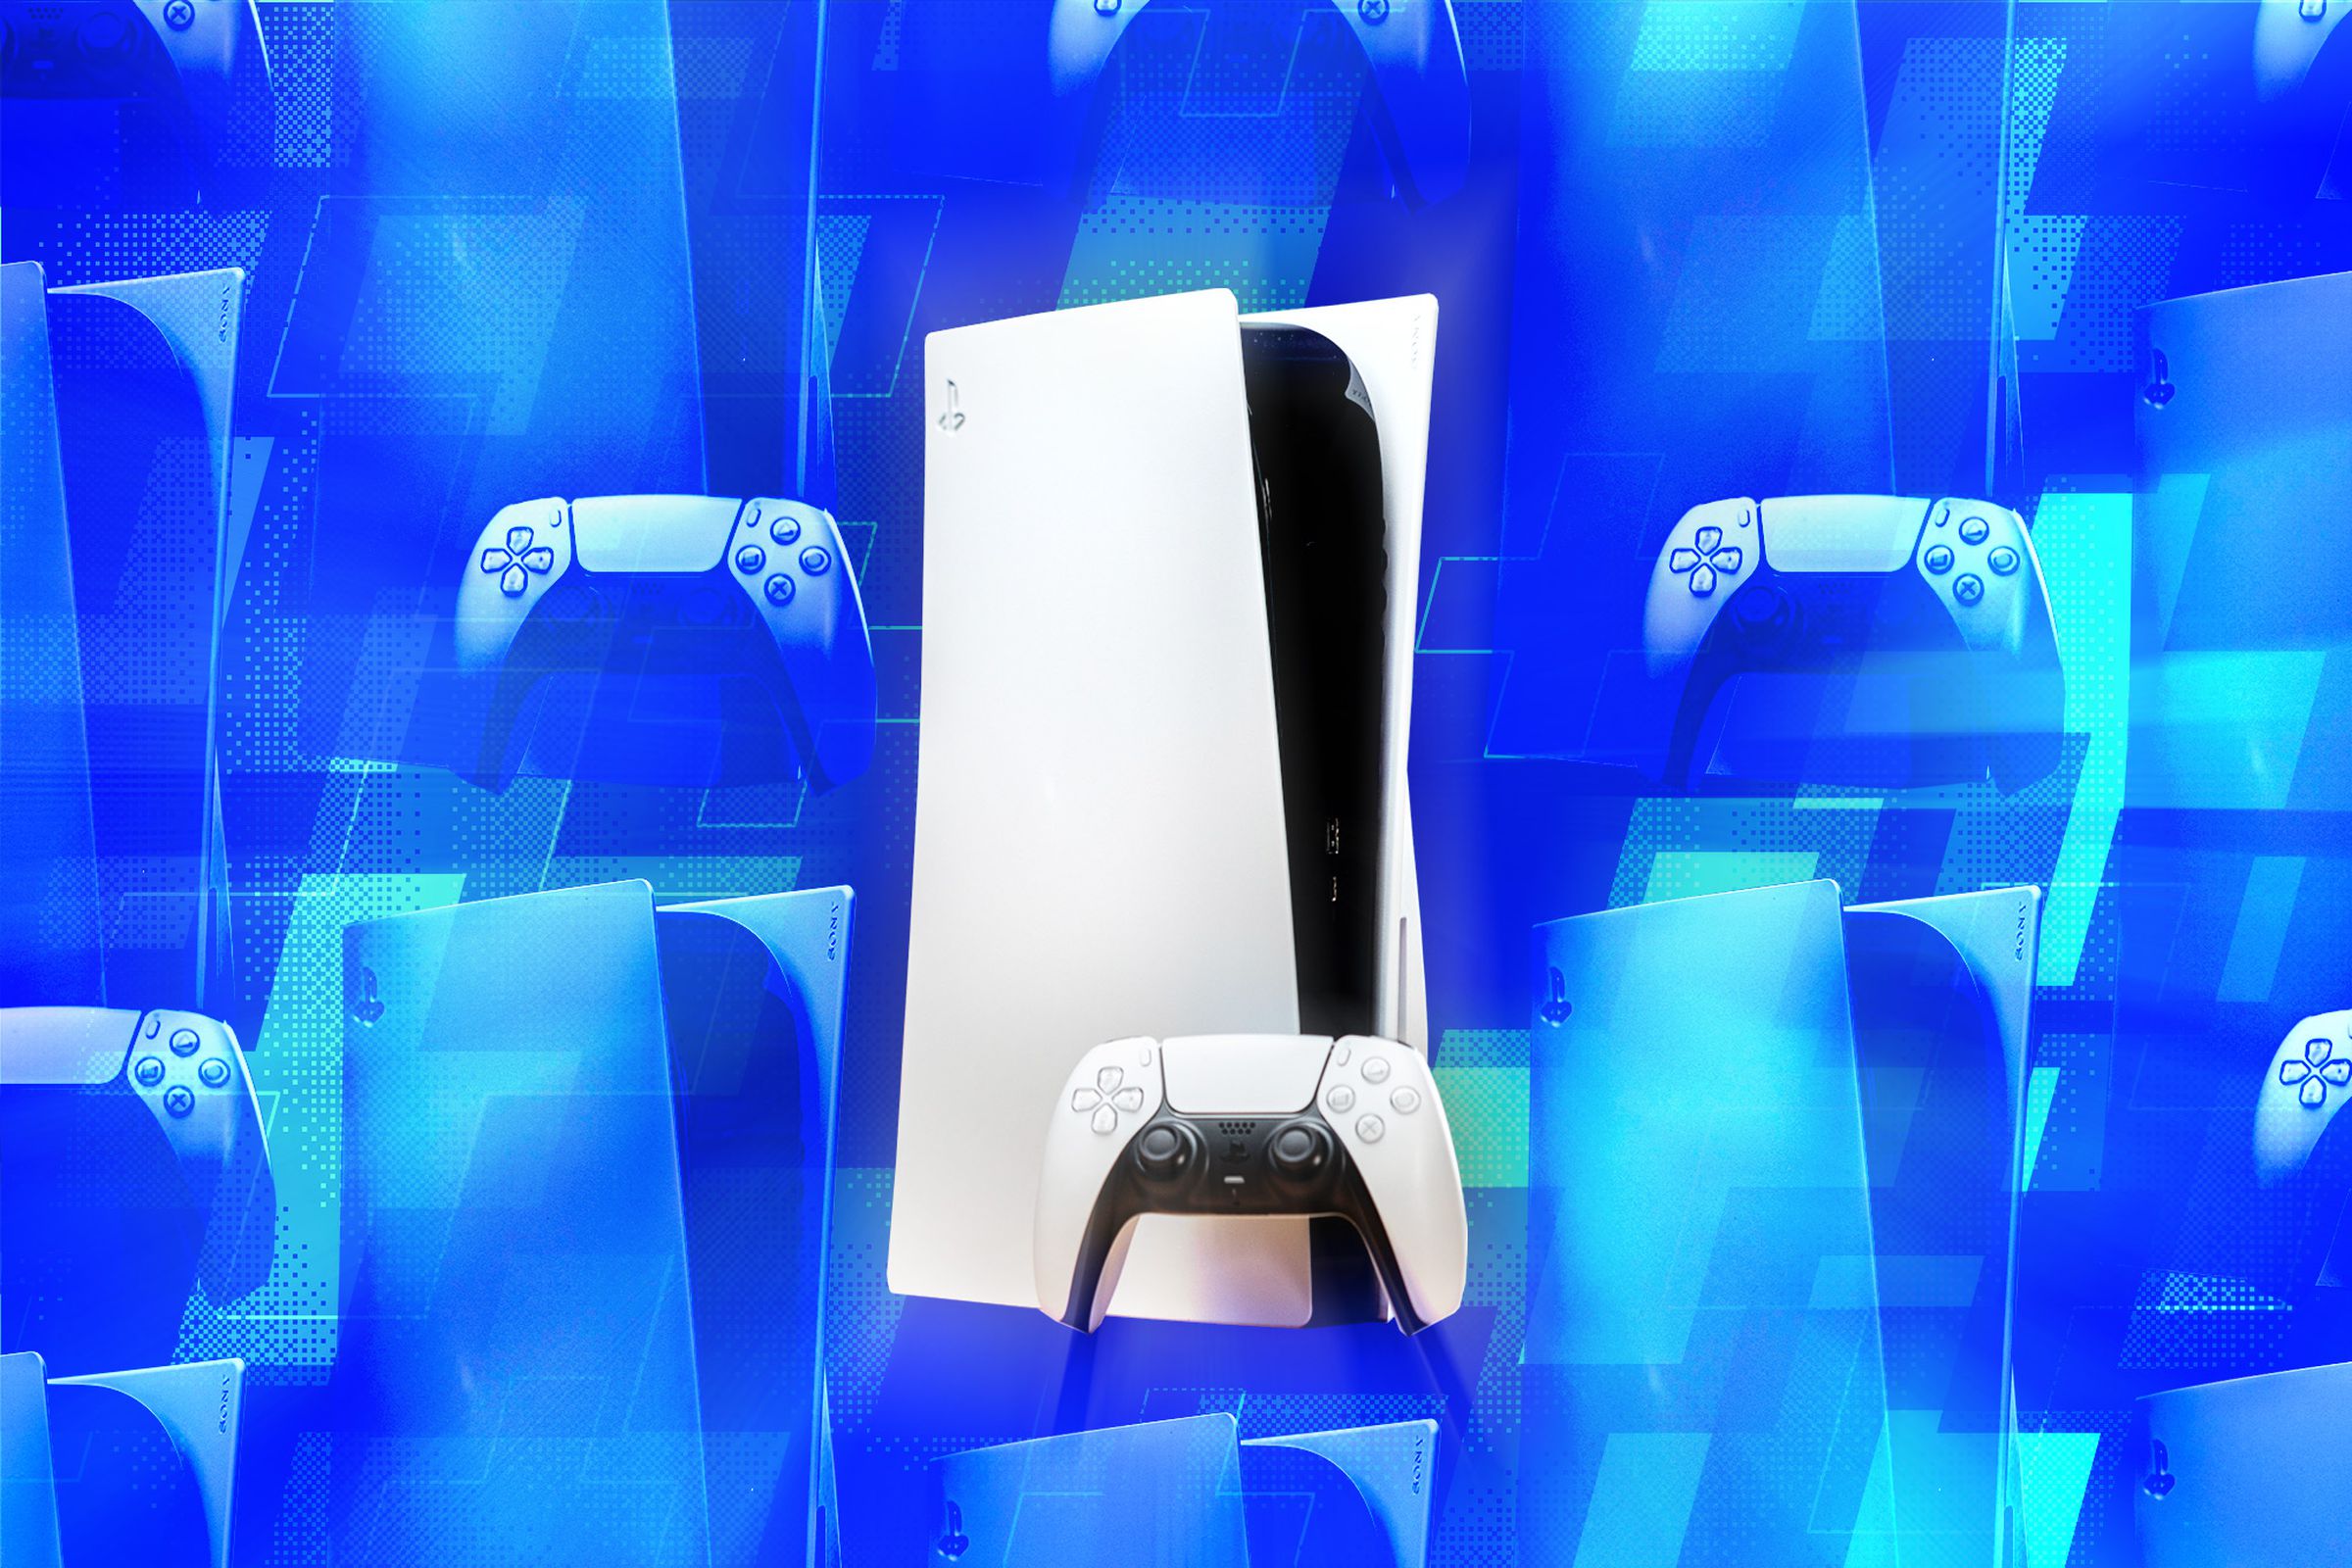 A photo of the PlayStation 5 console with its controller in front of a blue illustrative background made up of tiled PS5 consoles.